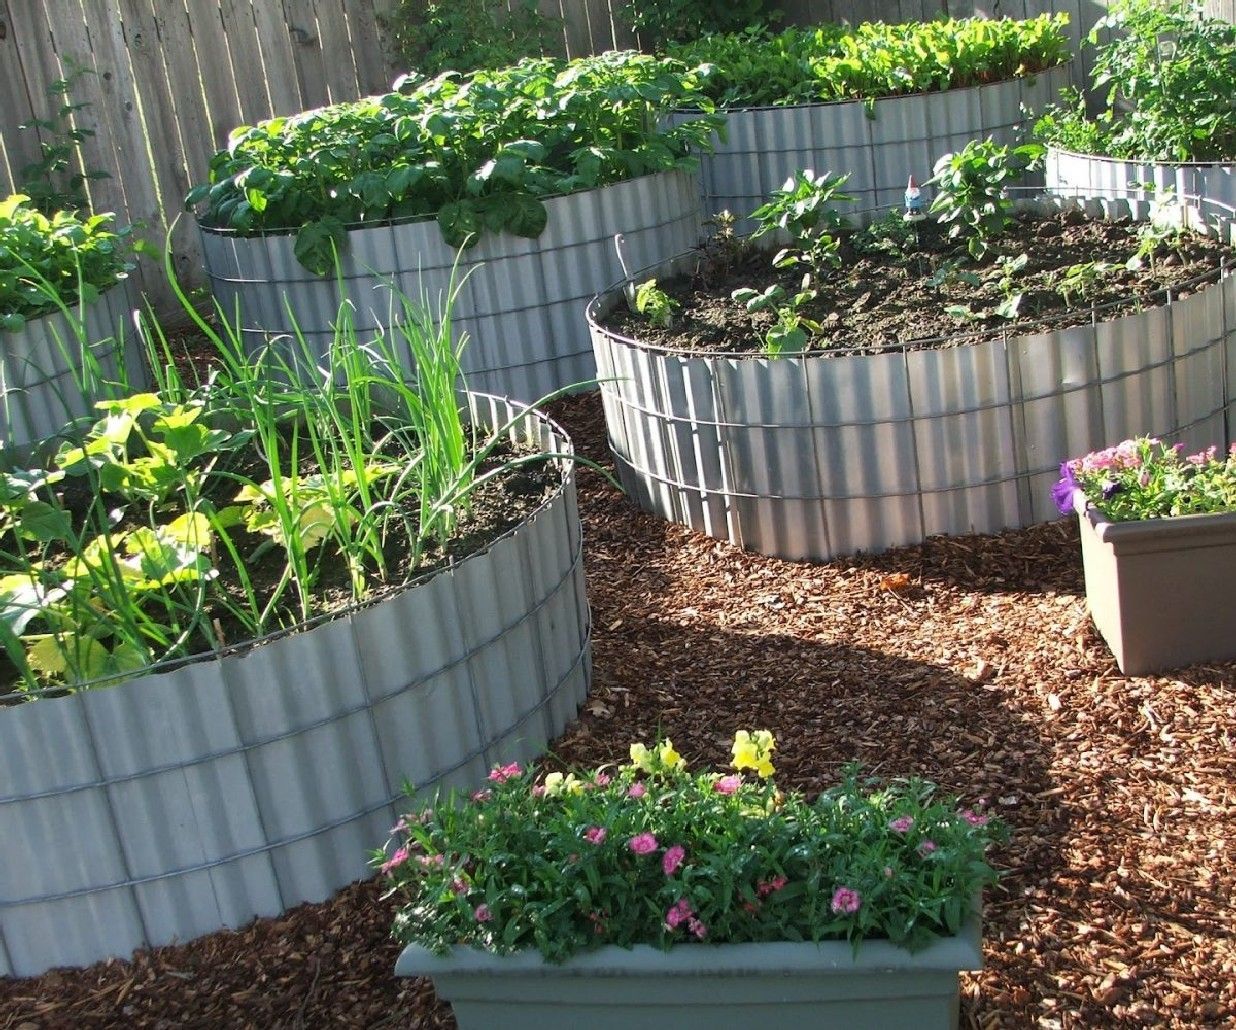 32 Amazing Beautiful Round Raised Garden Bed Ideas that You Can Make in A Weekend -   19 garden design Plants raised beds
 ideas